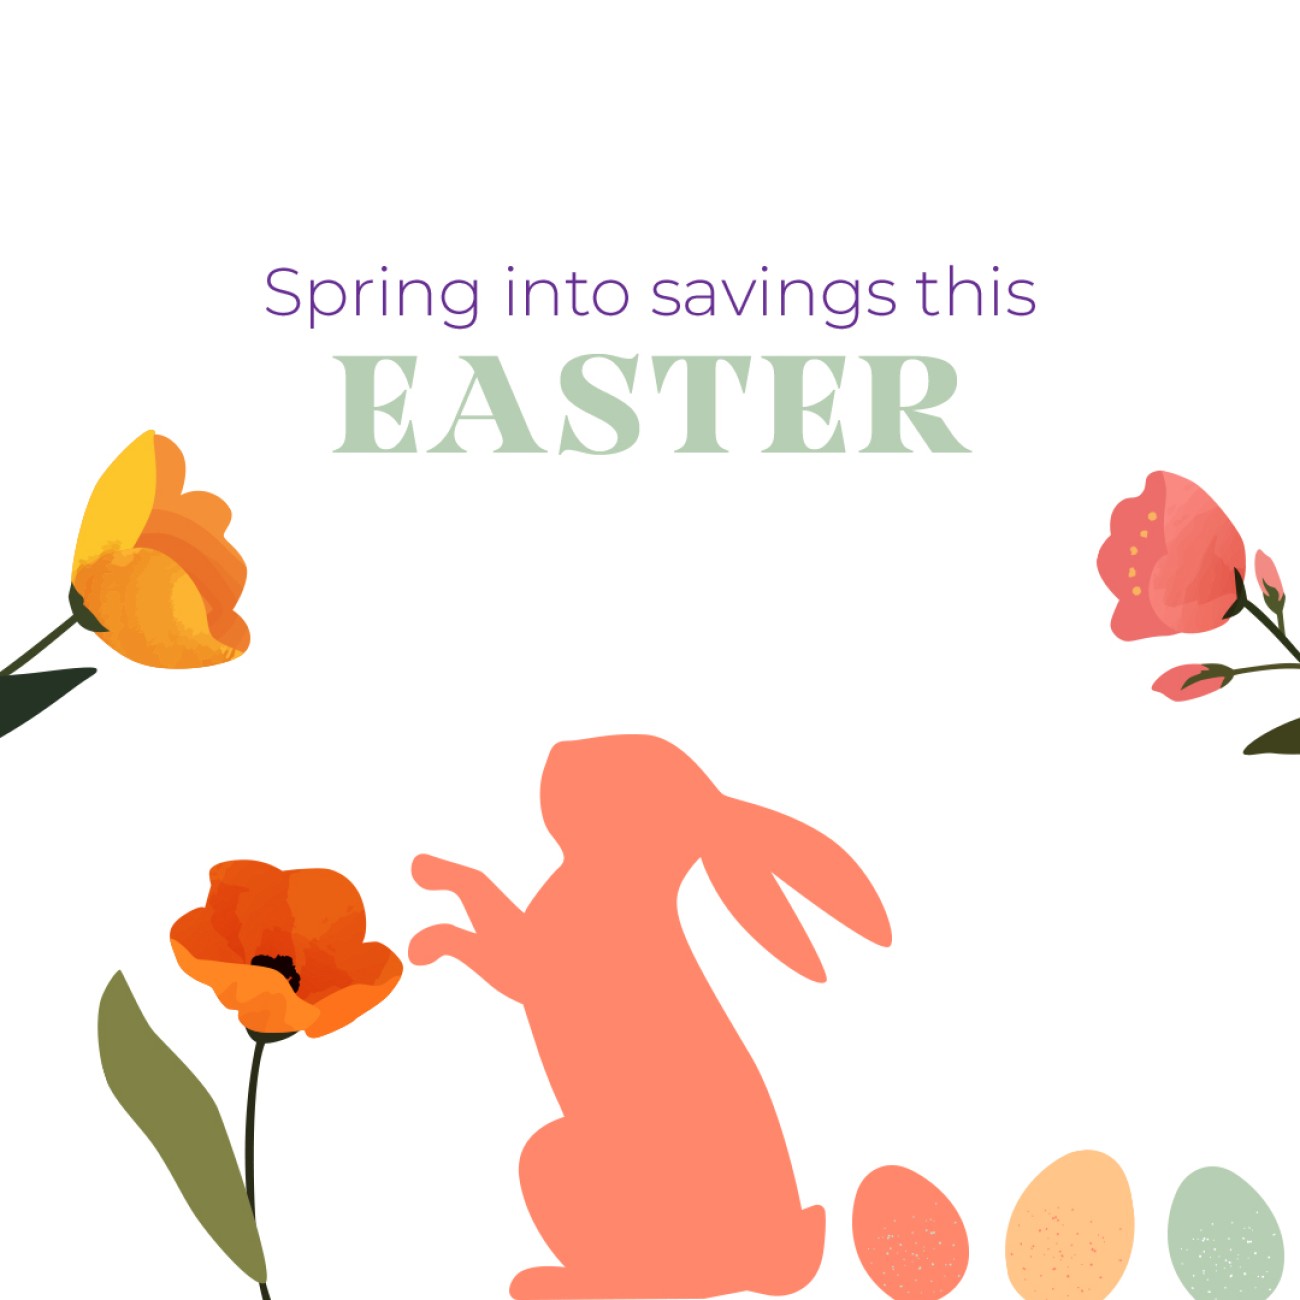 Spring into savings this Easter